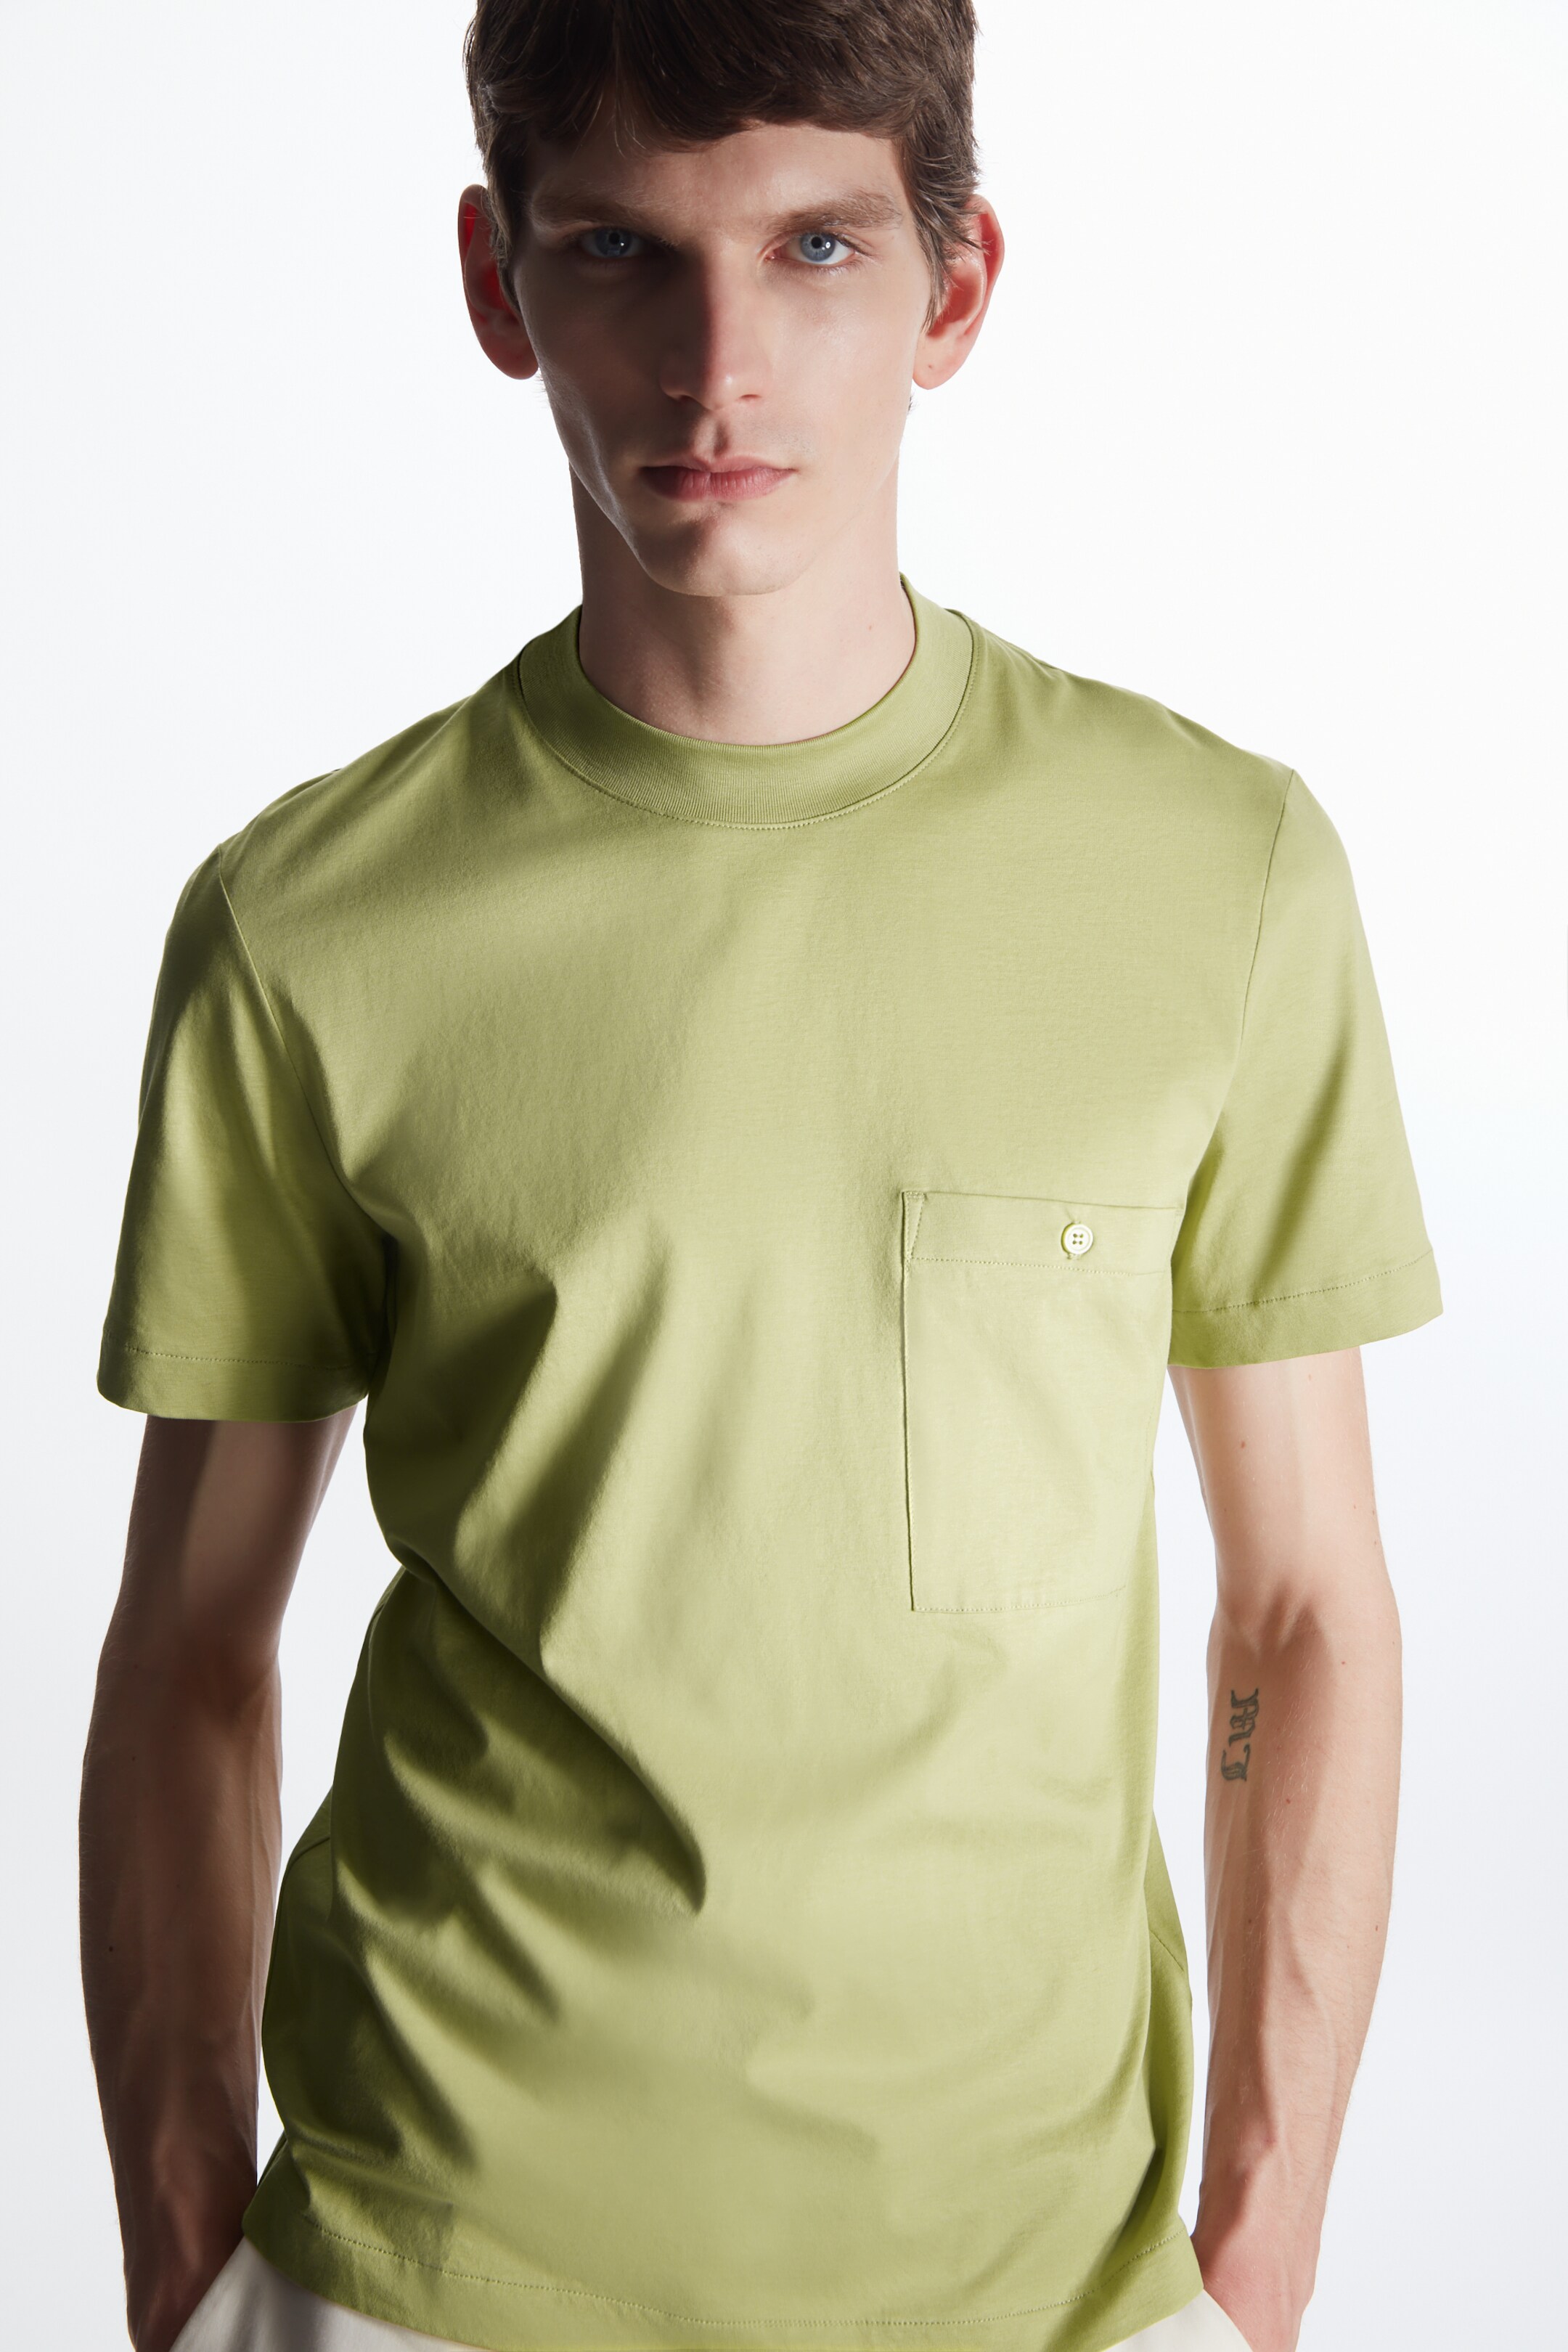 Front image of cos PATCH POCKET T-SHIRT in LIGHT KHAKI